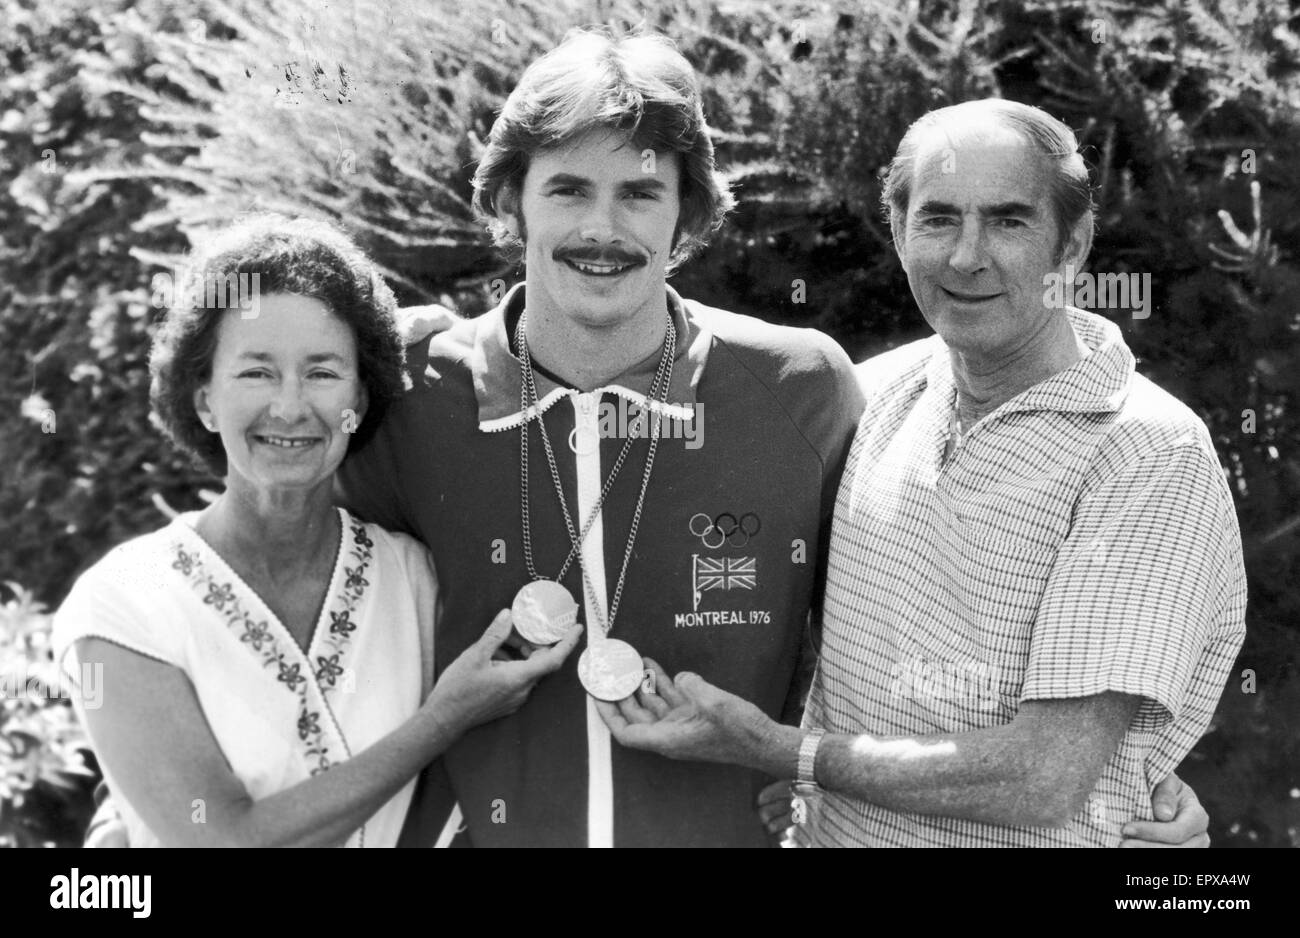 David Wilkie, Olympic Champion, 200 metre breaststroke,  Montreal Olympics, Canada, July 1976. Pictured with parents in Montreal, proudly displaying Gold medal and Silver medal he later won in 100 metre breaststroke. Stock Photo